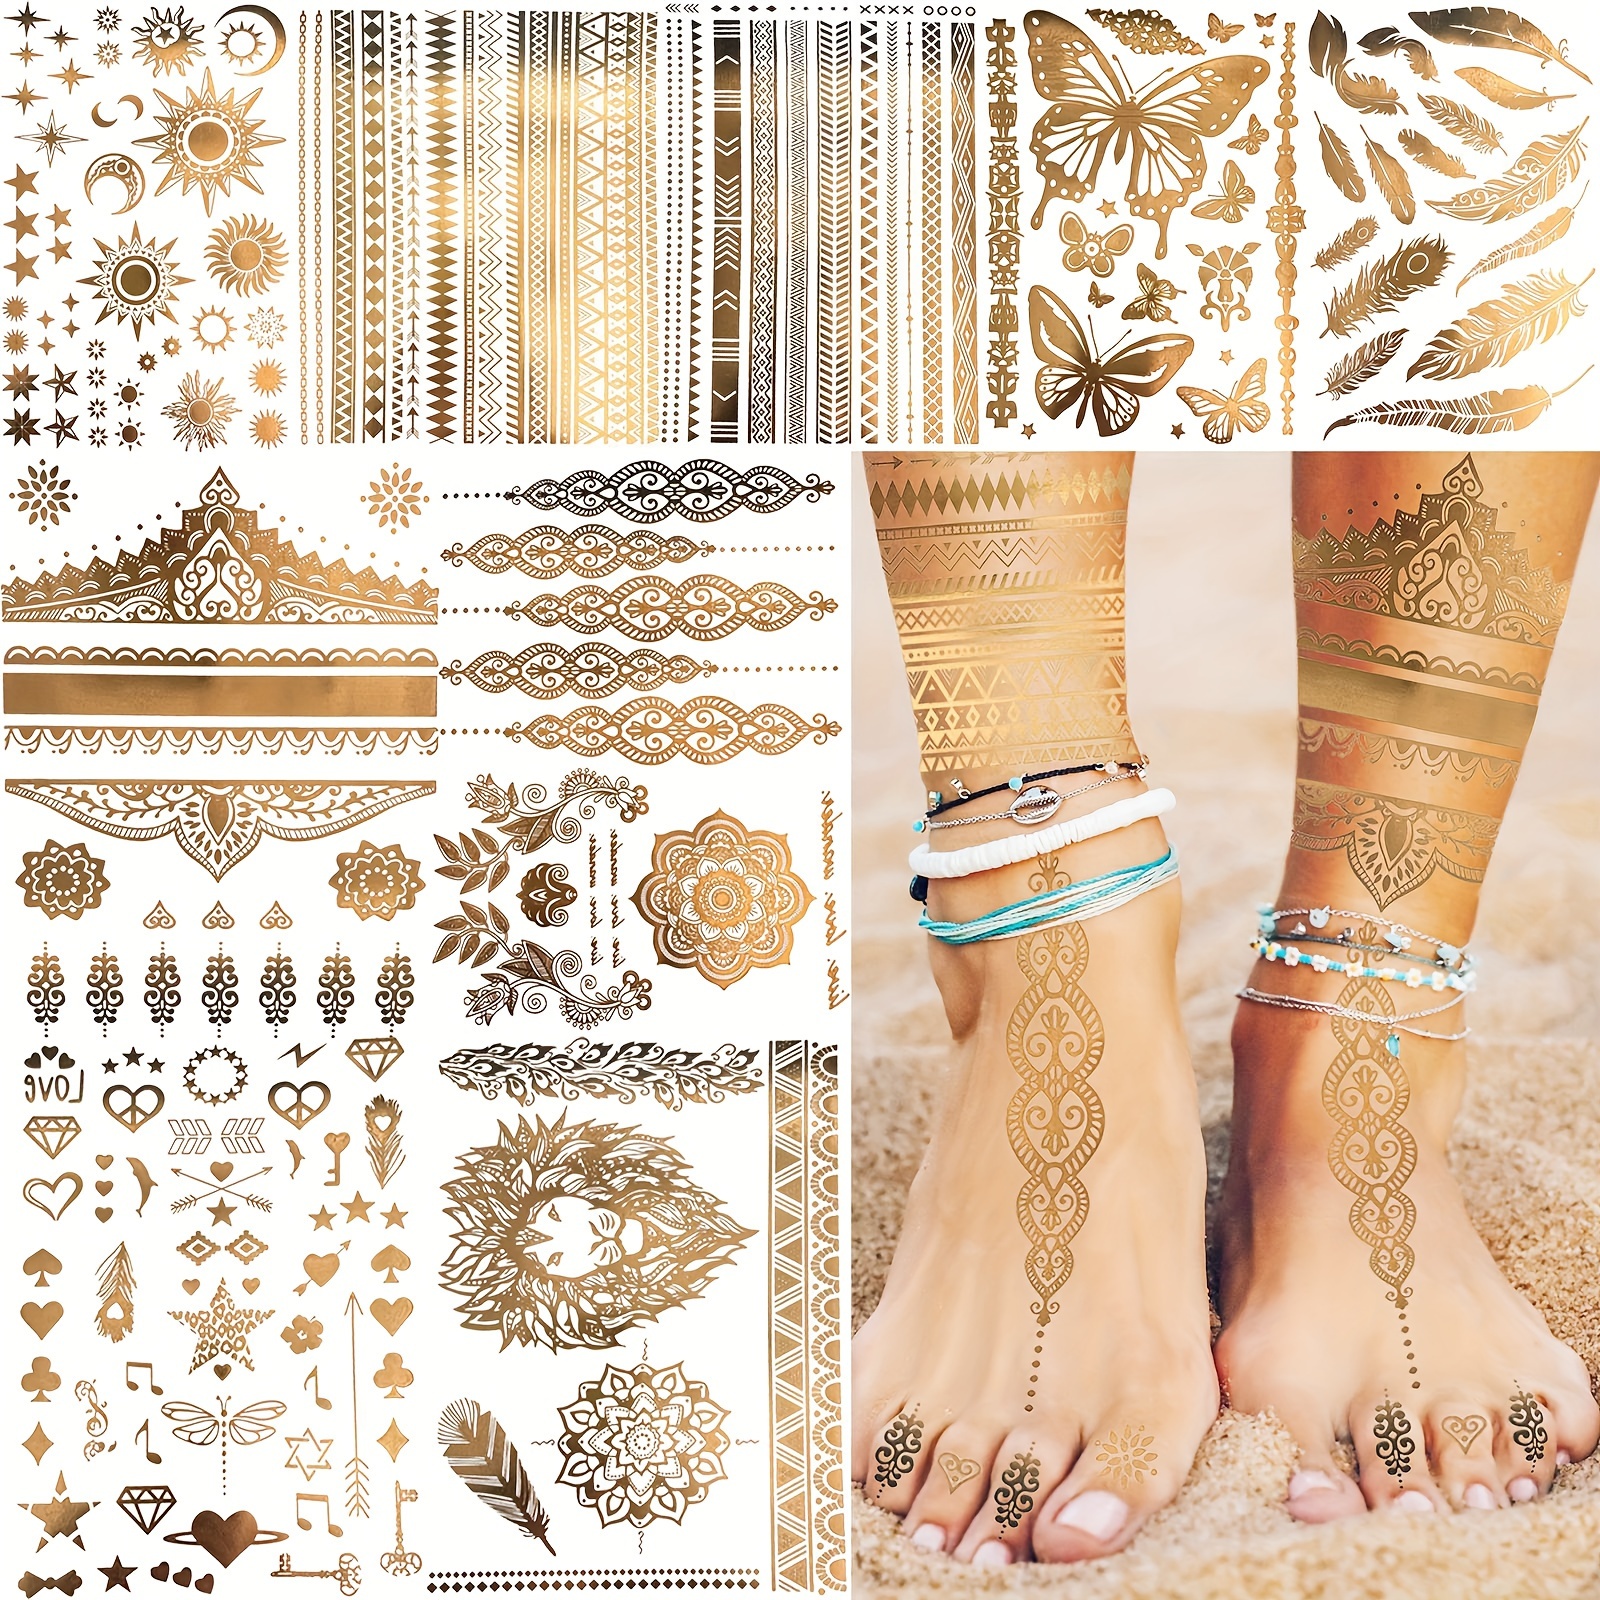 

9-sheet Metallic Temporary Tattoos In Golden - Waterproof Body Art Decals For Adults With Shimmering Lion, Butterfly, And , Long-lasting Fake Tattoo Stickers For Arms, Legs, And Body